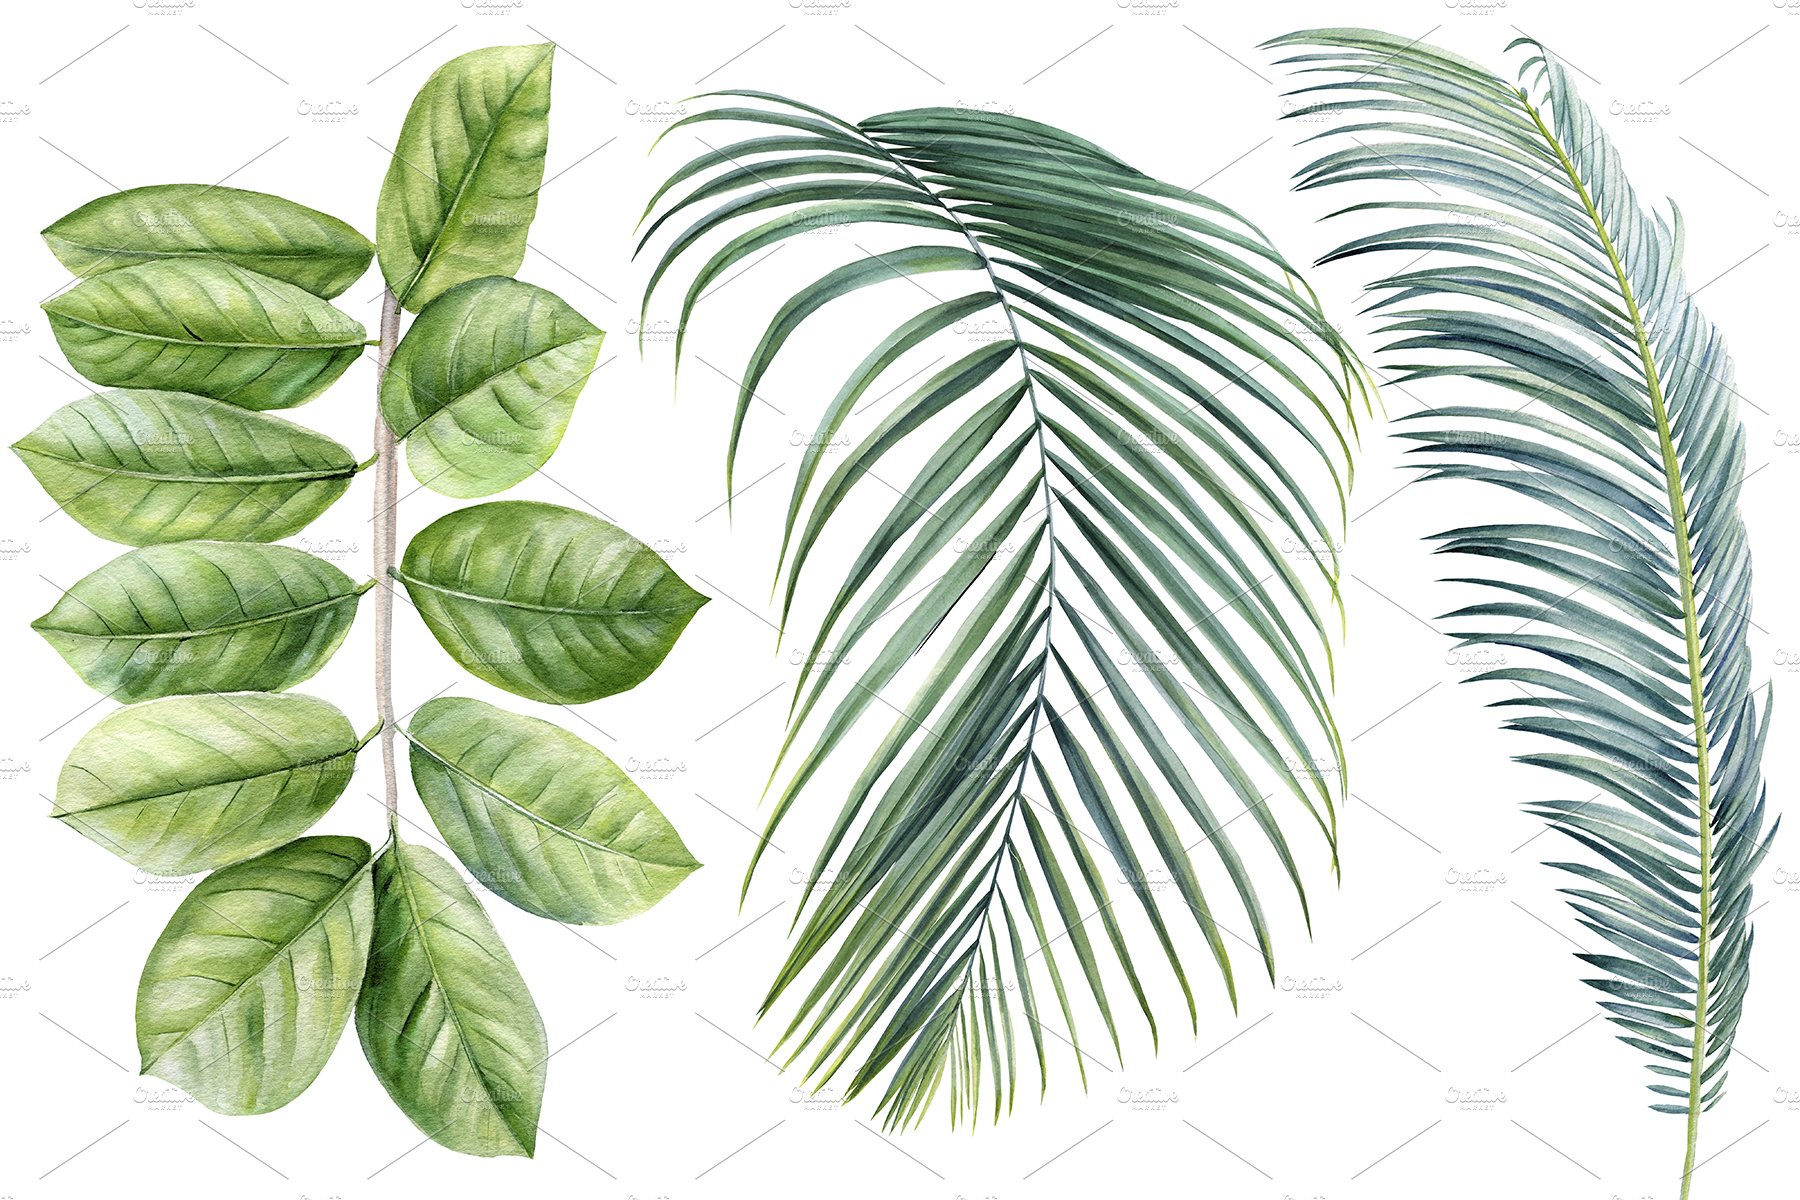 Three different types of leaves on a white background.